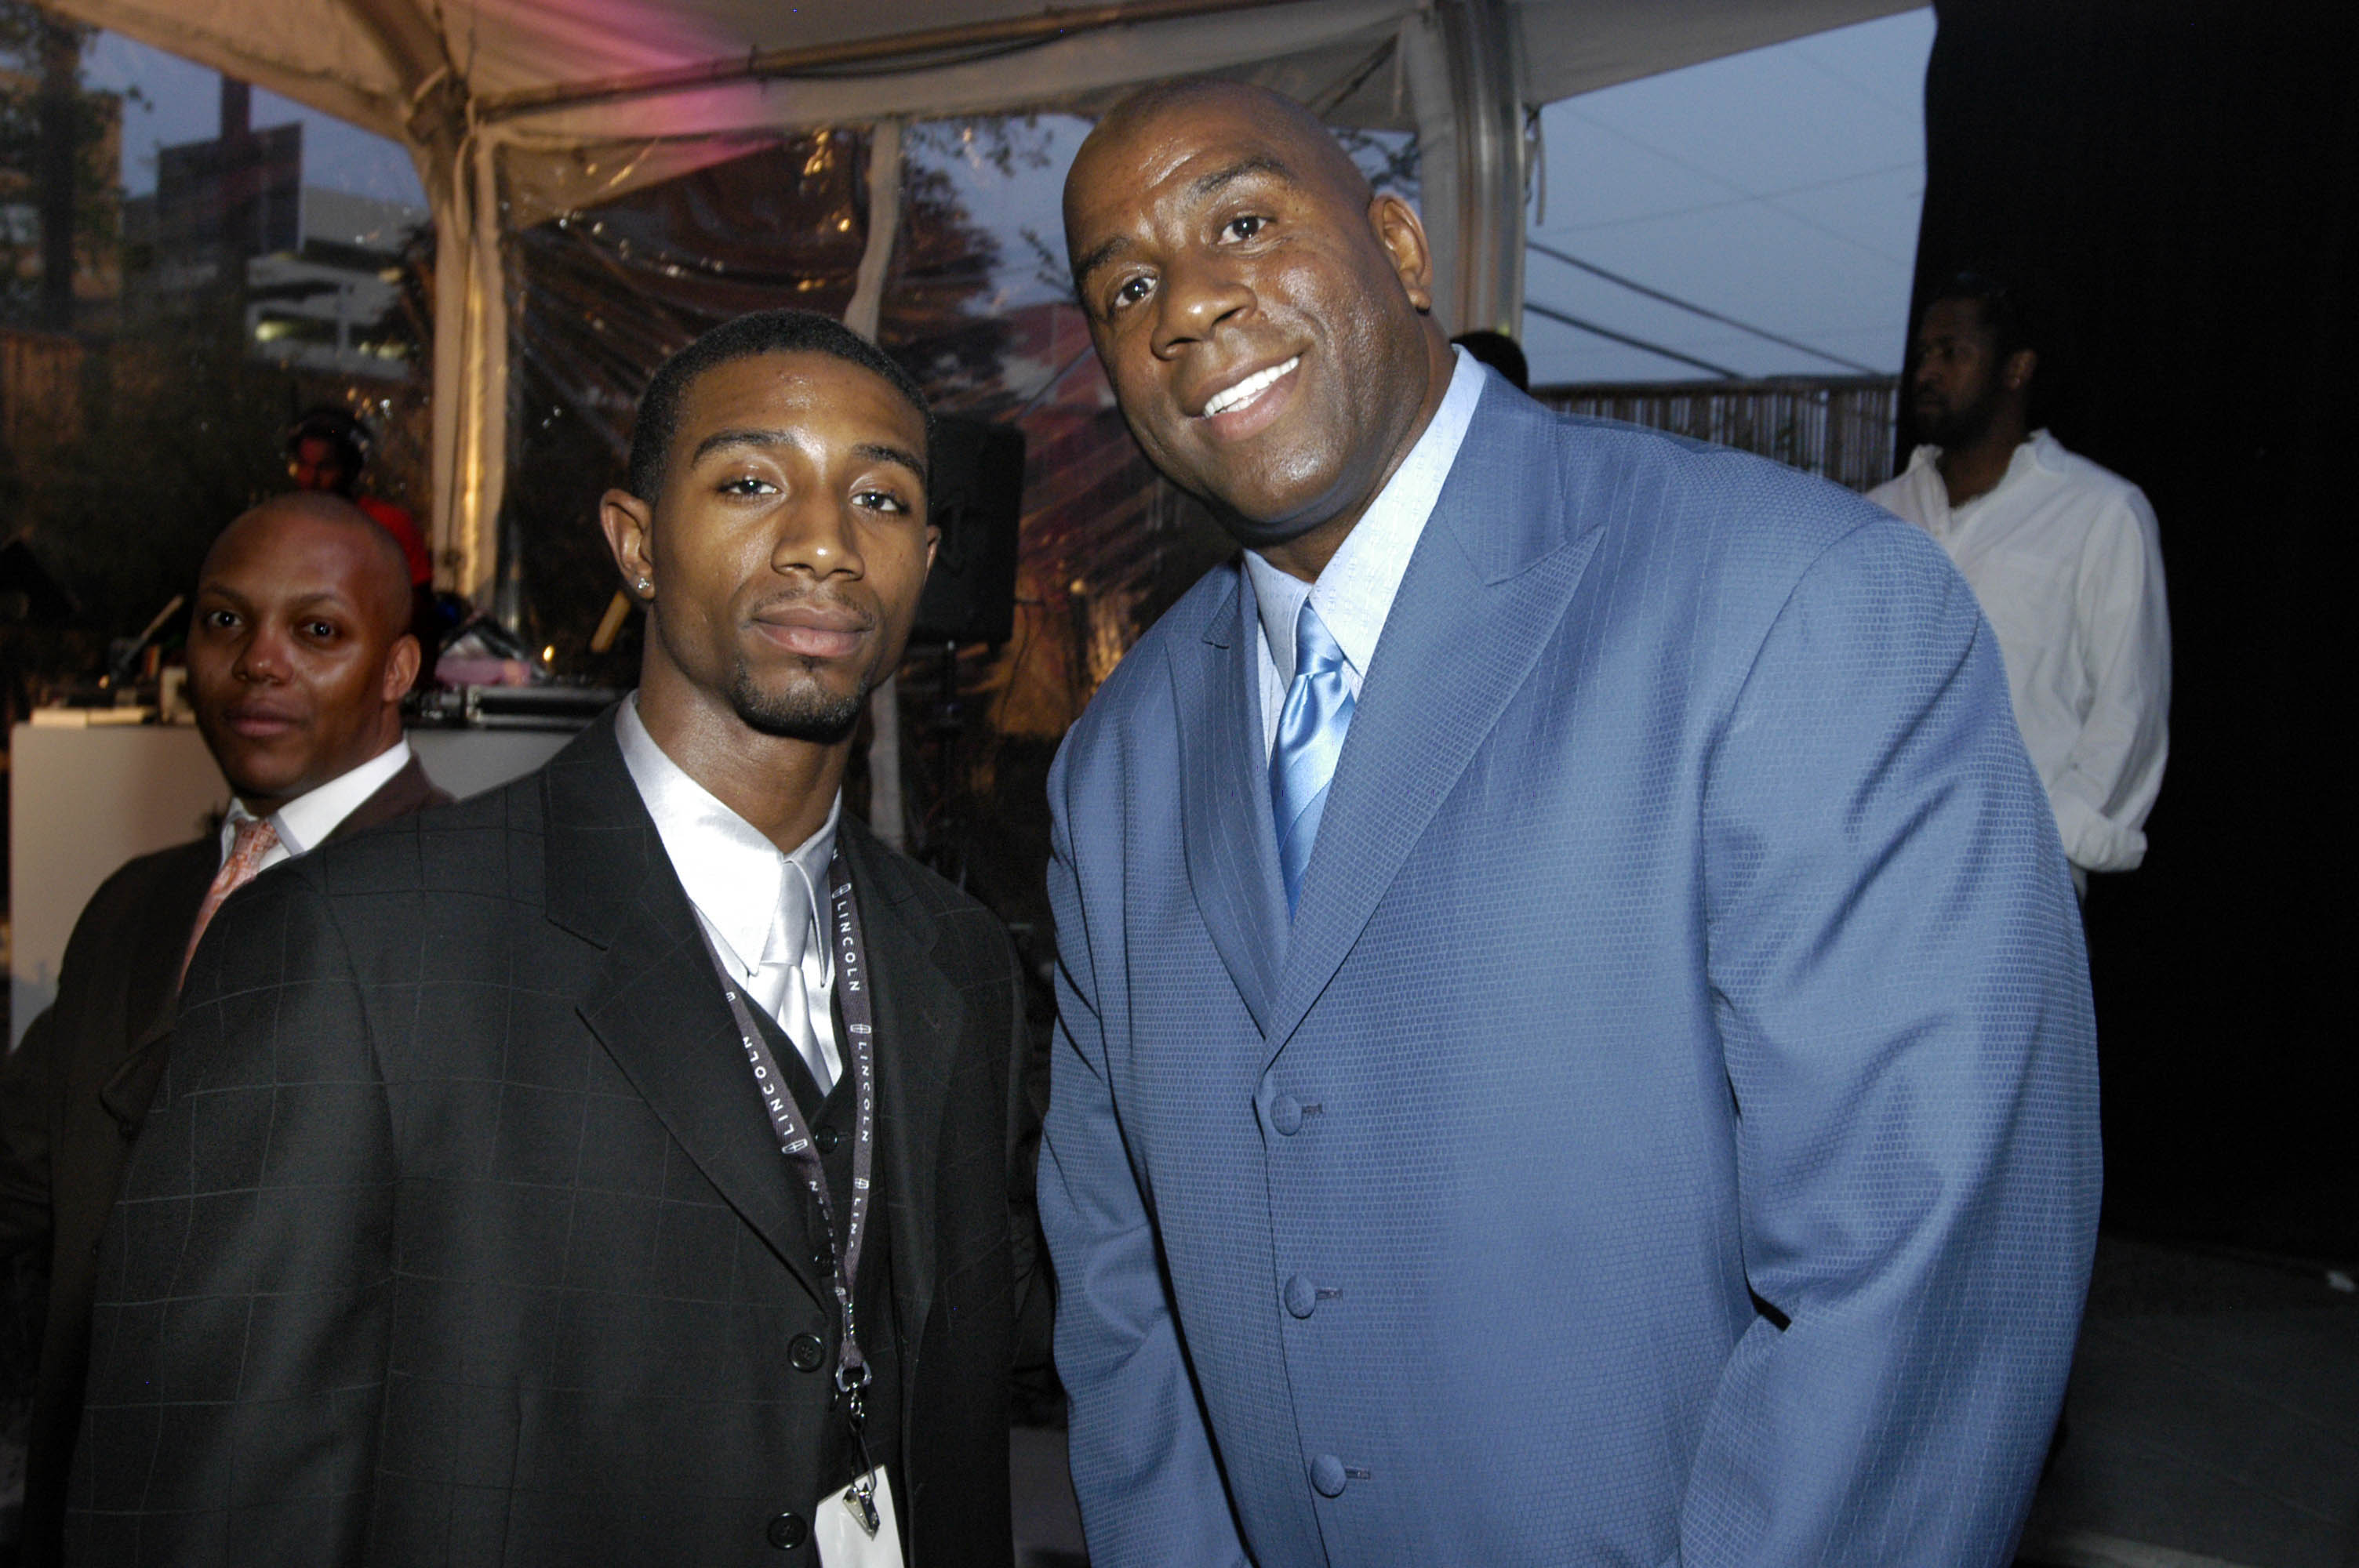 Andre Johnson and Earvin "Magic" Johnson during the Lincoln Luxury Event with Earvin "Magic" Johnson and New Edition at Compound in Atlanta, Georgia, United States, April 20, 2005 | Photo: GettyImages